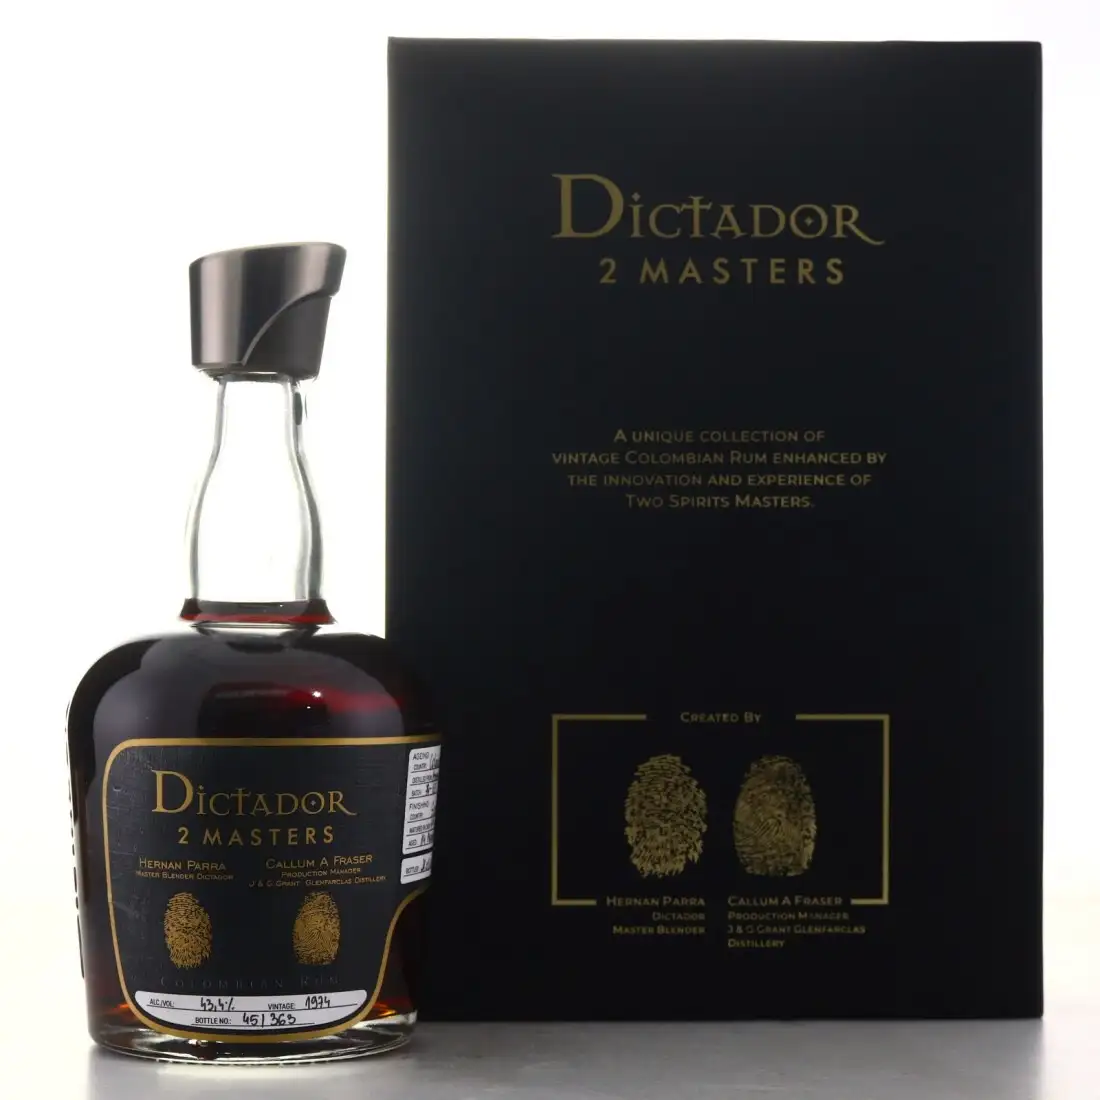 Image of the front of the bottle of the rum Dictador 2 Masters